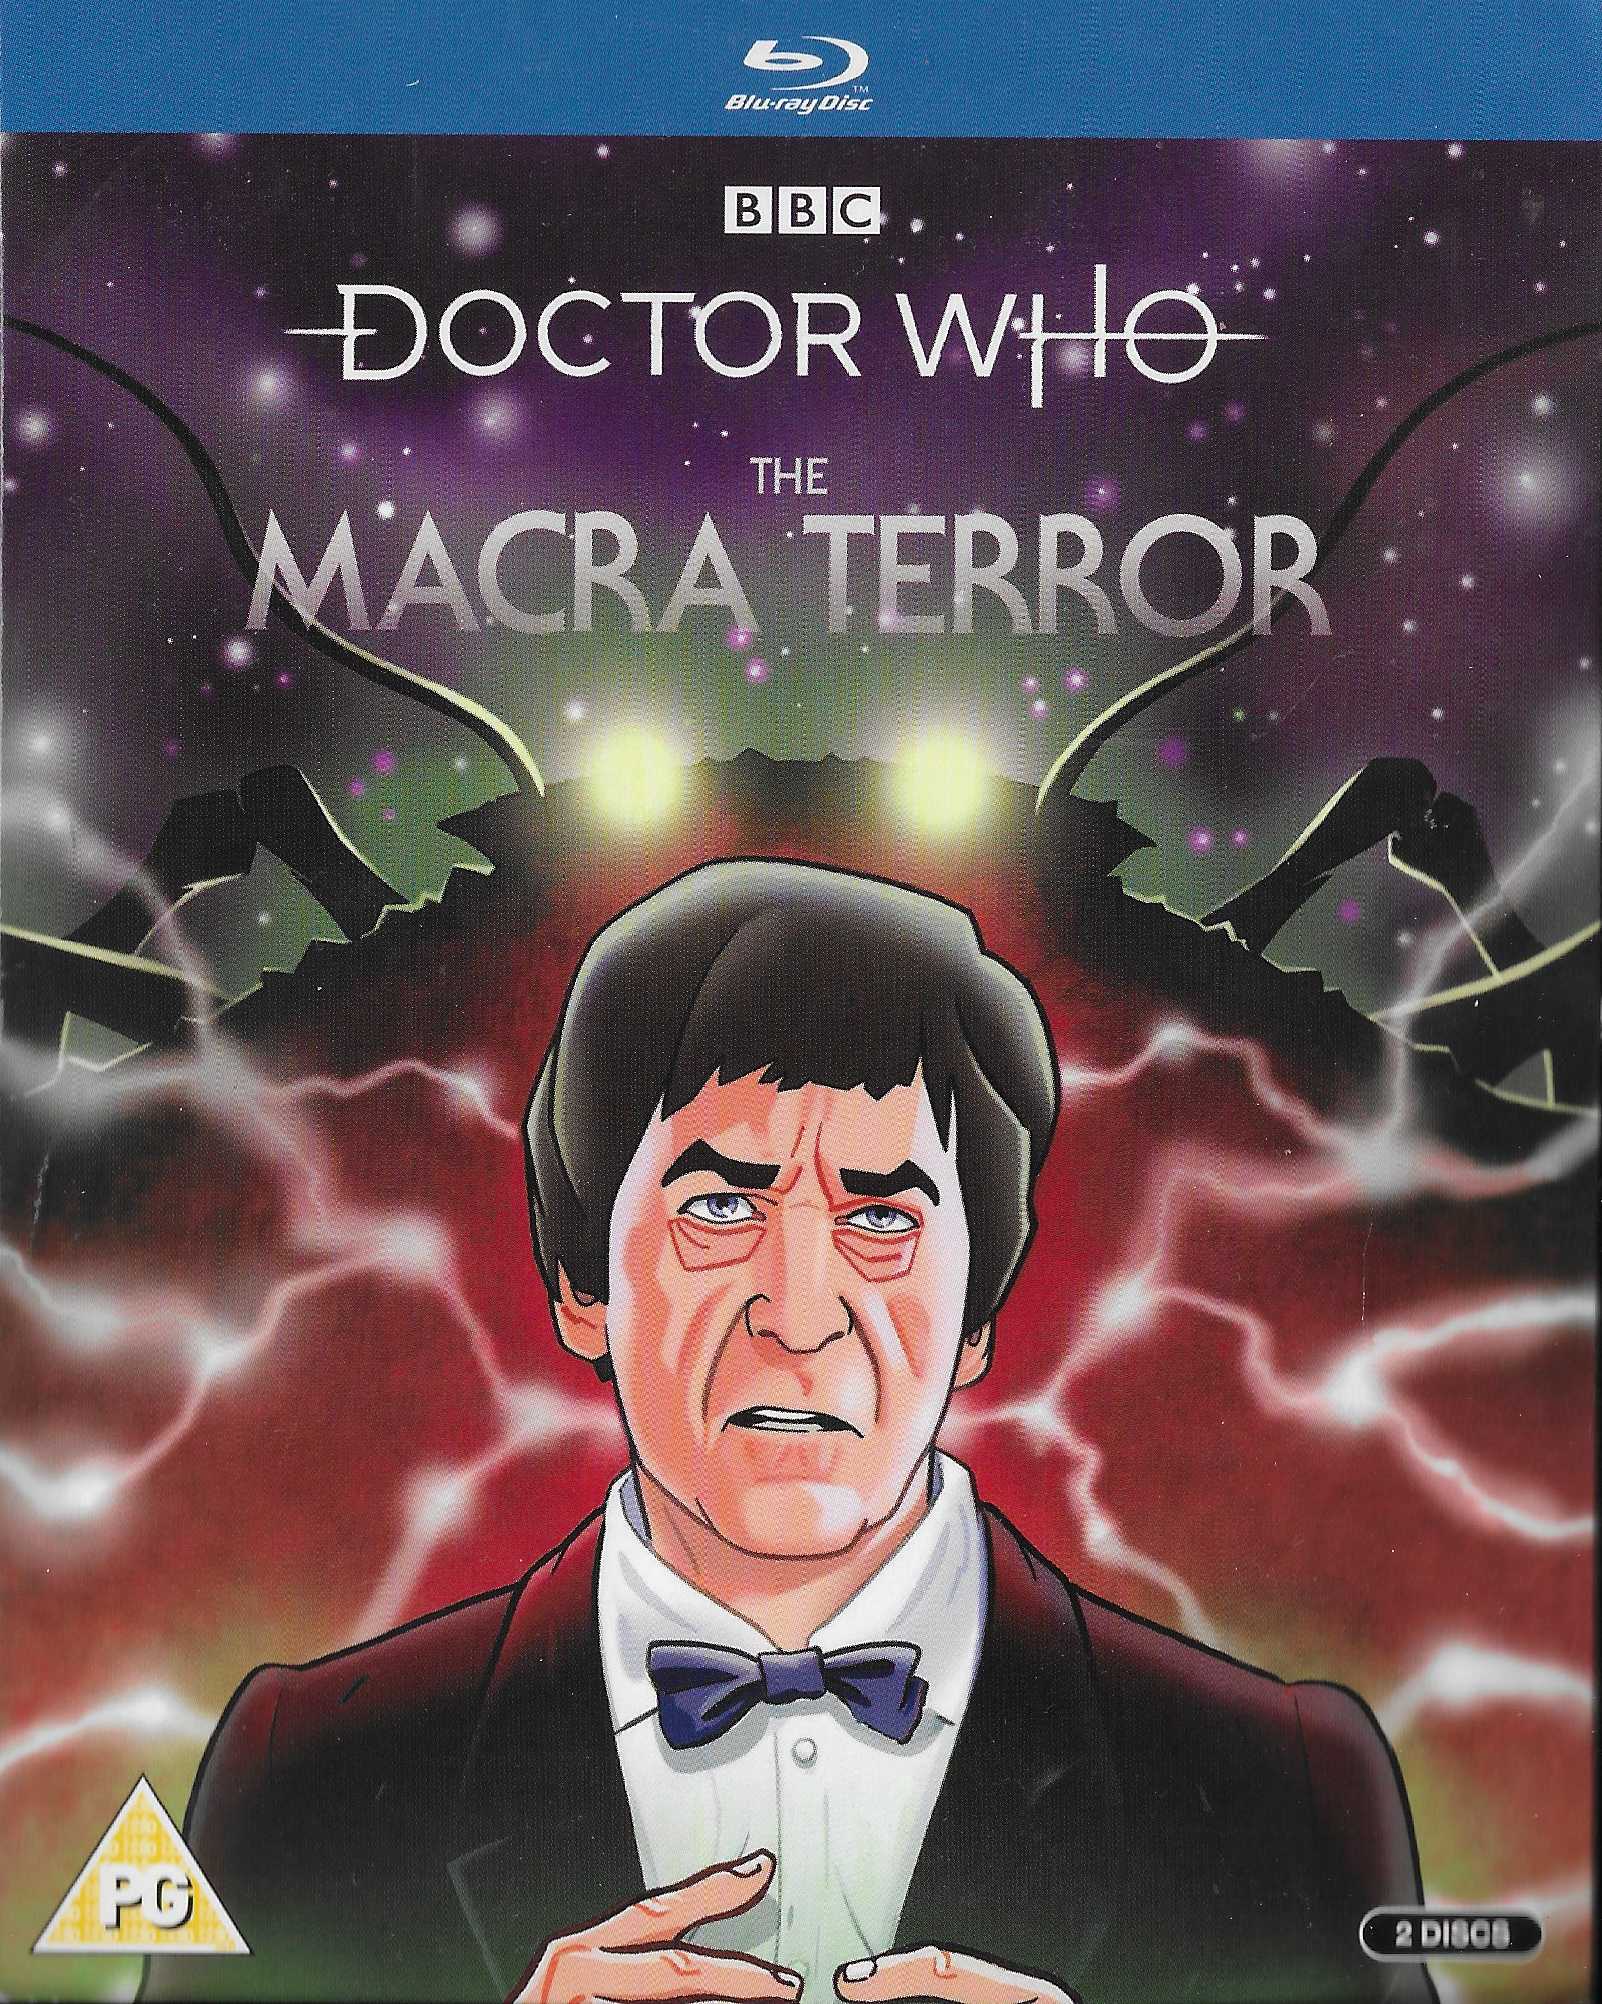 Picture of BBCBD 0463 Doctor Who - The Macra terror by artist Ian Stuart Black from the BBC records and Tapes library